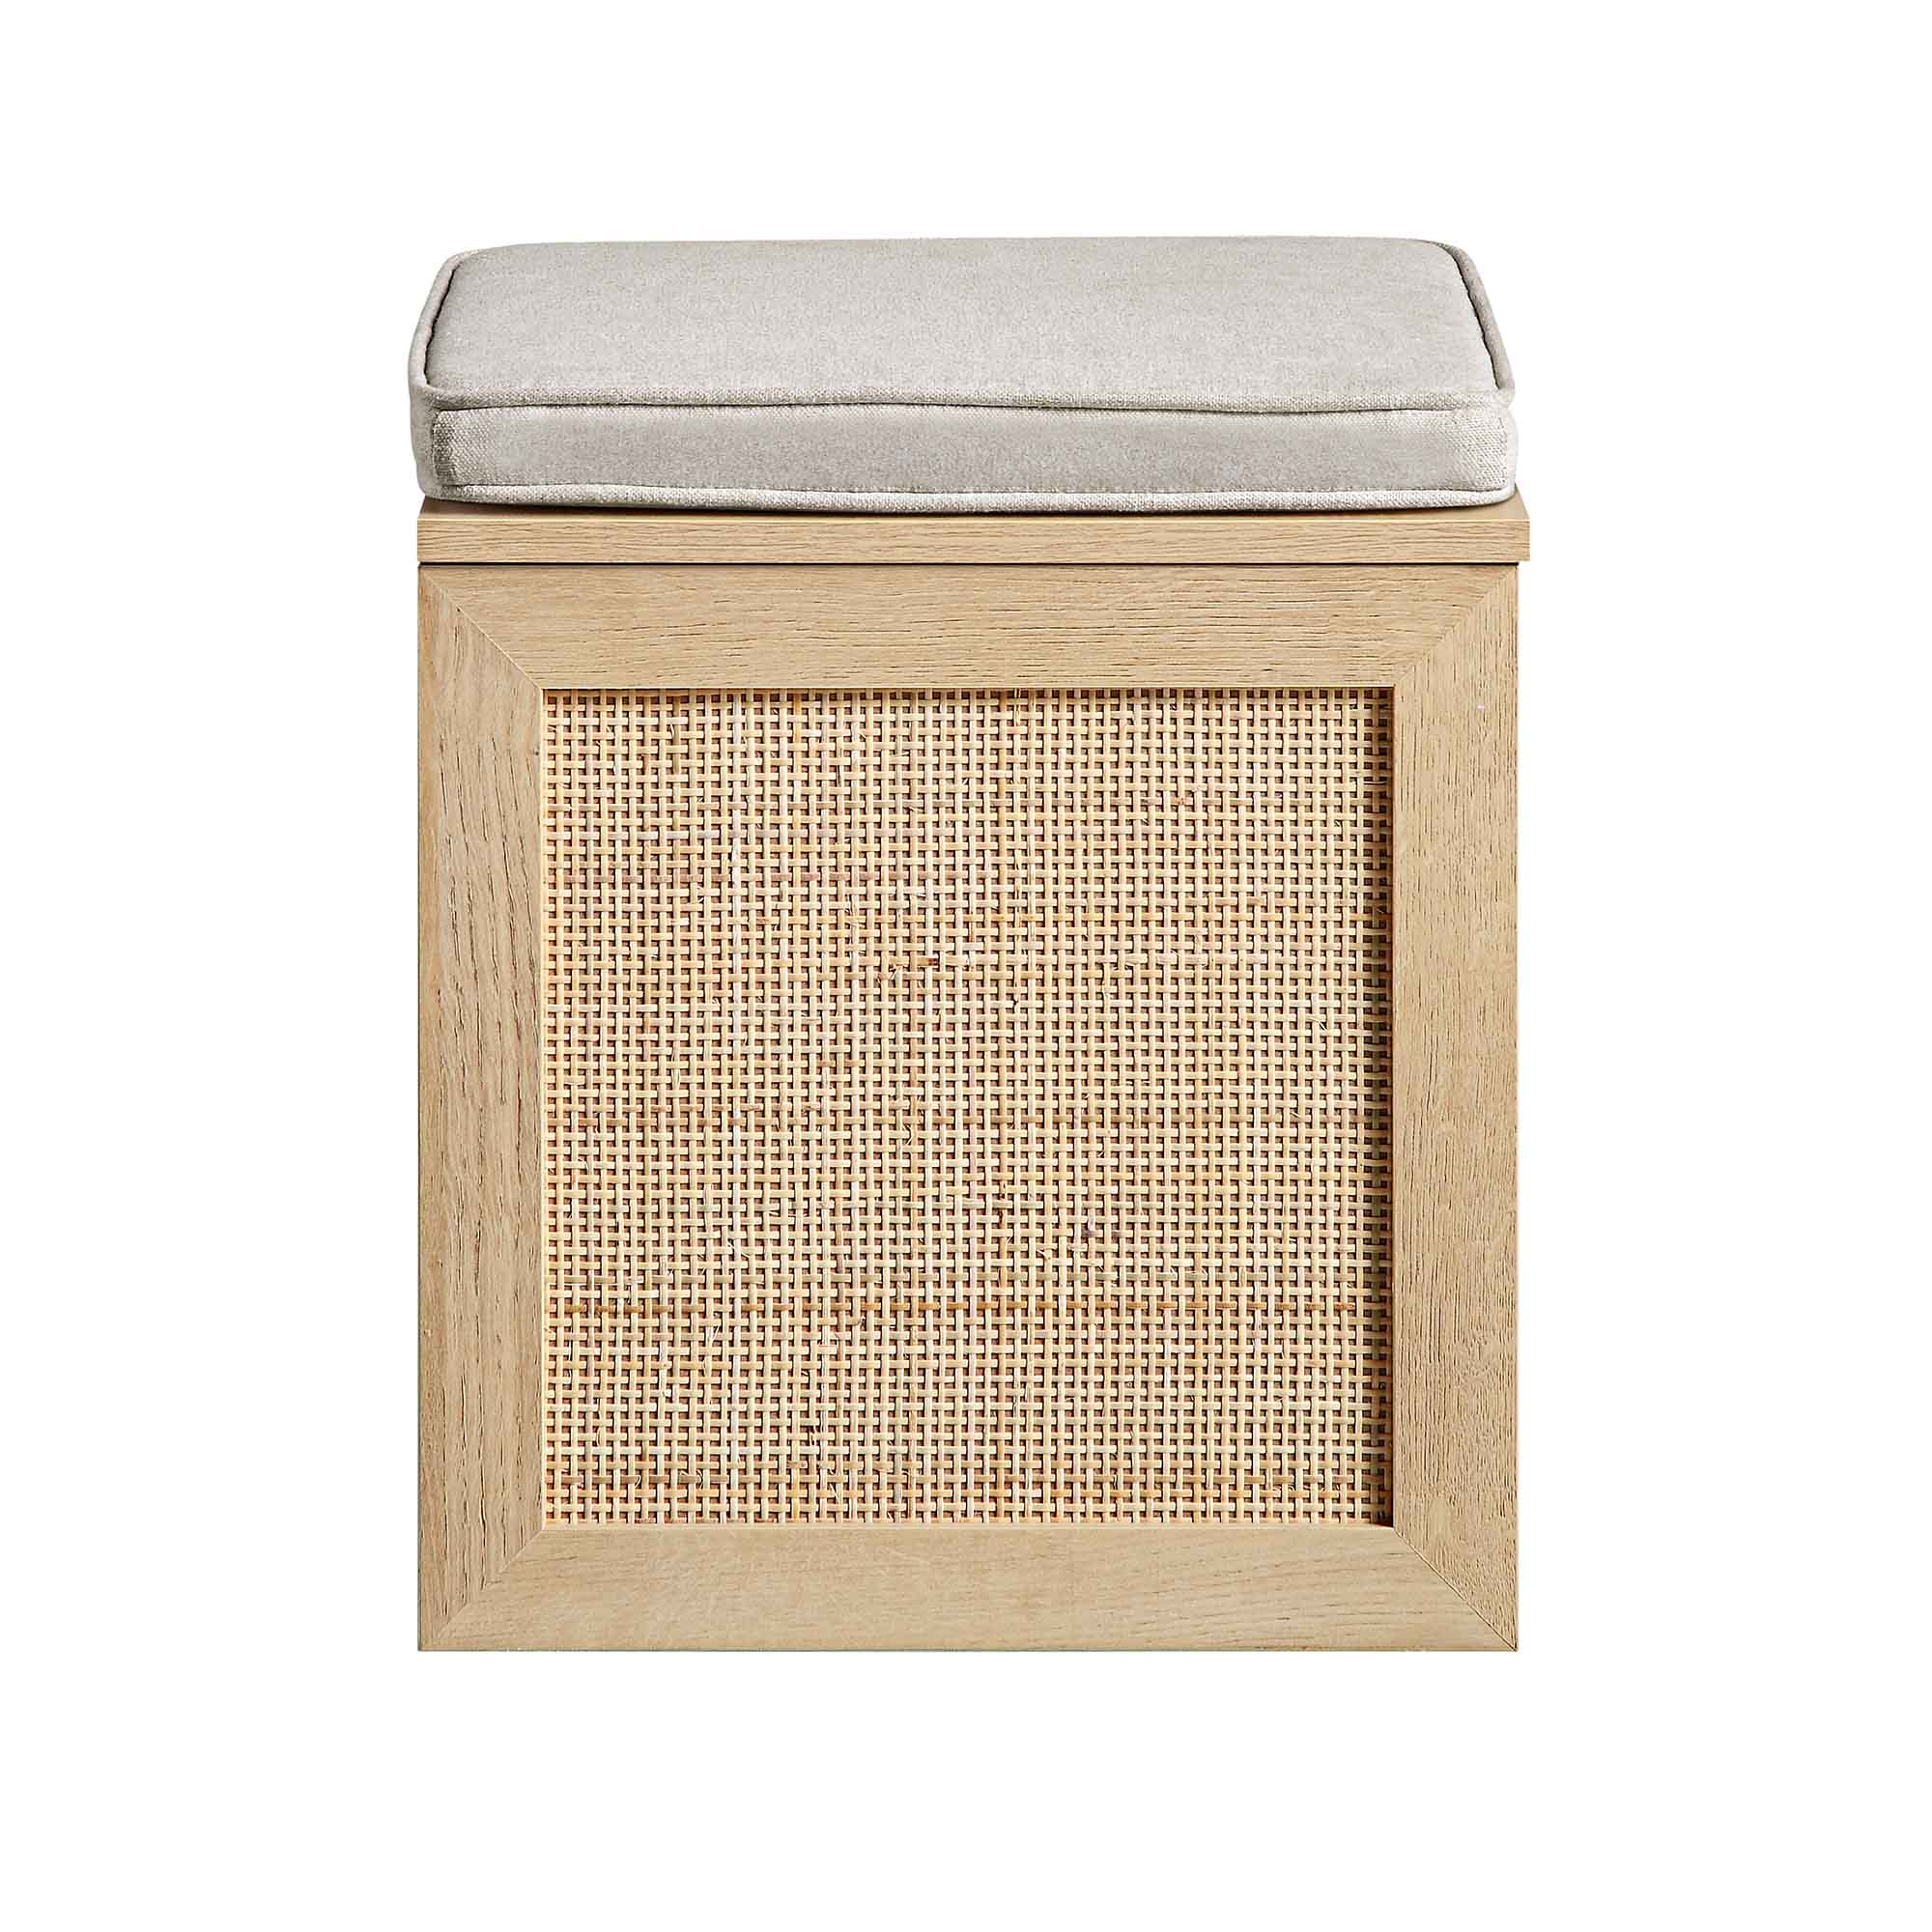 Frances Woven Rattan Single Storage Stool with Cushion, Natural